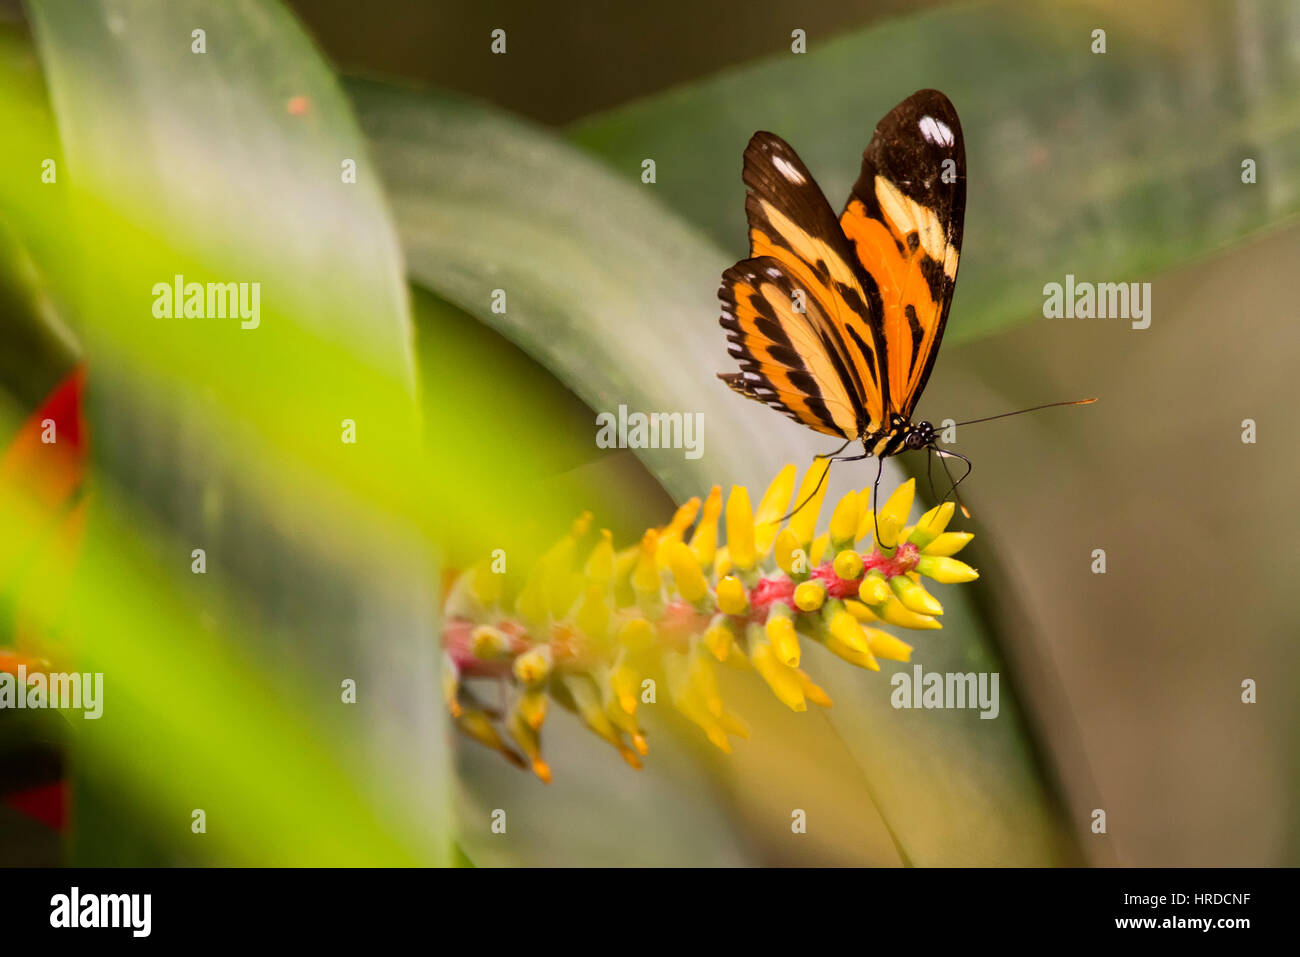 Butterfly lands on flower, photographed in Domingos Martins, Espírito Santo - Brazil. Atlantic forest Biome. Wild animal. Stock Photo